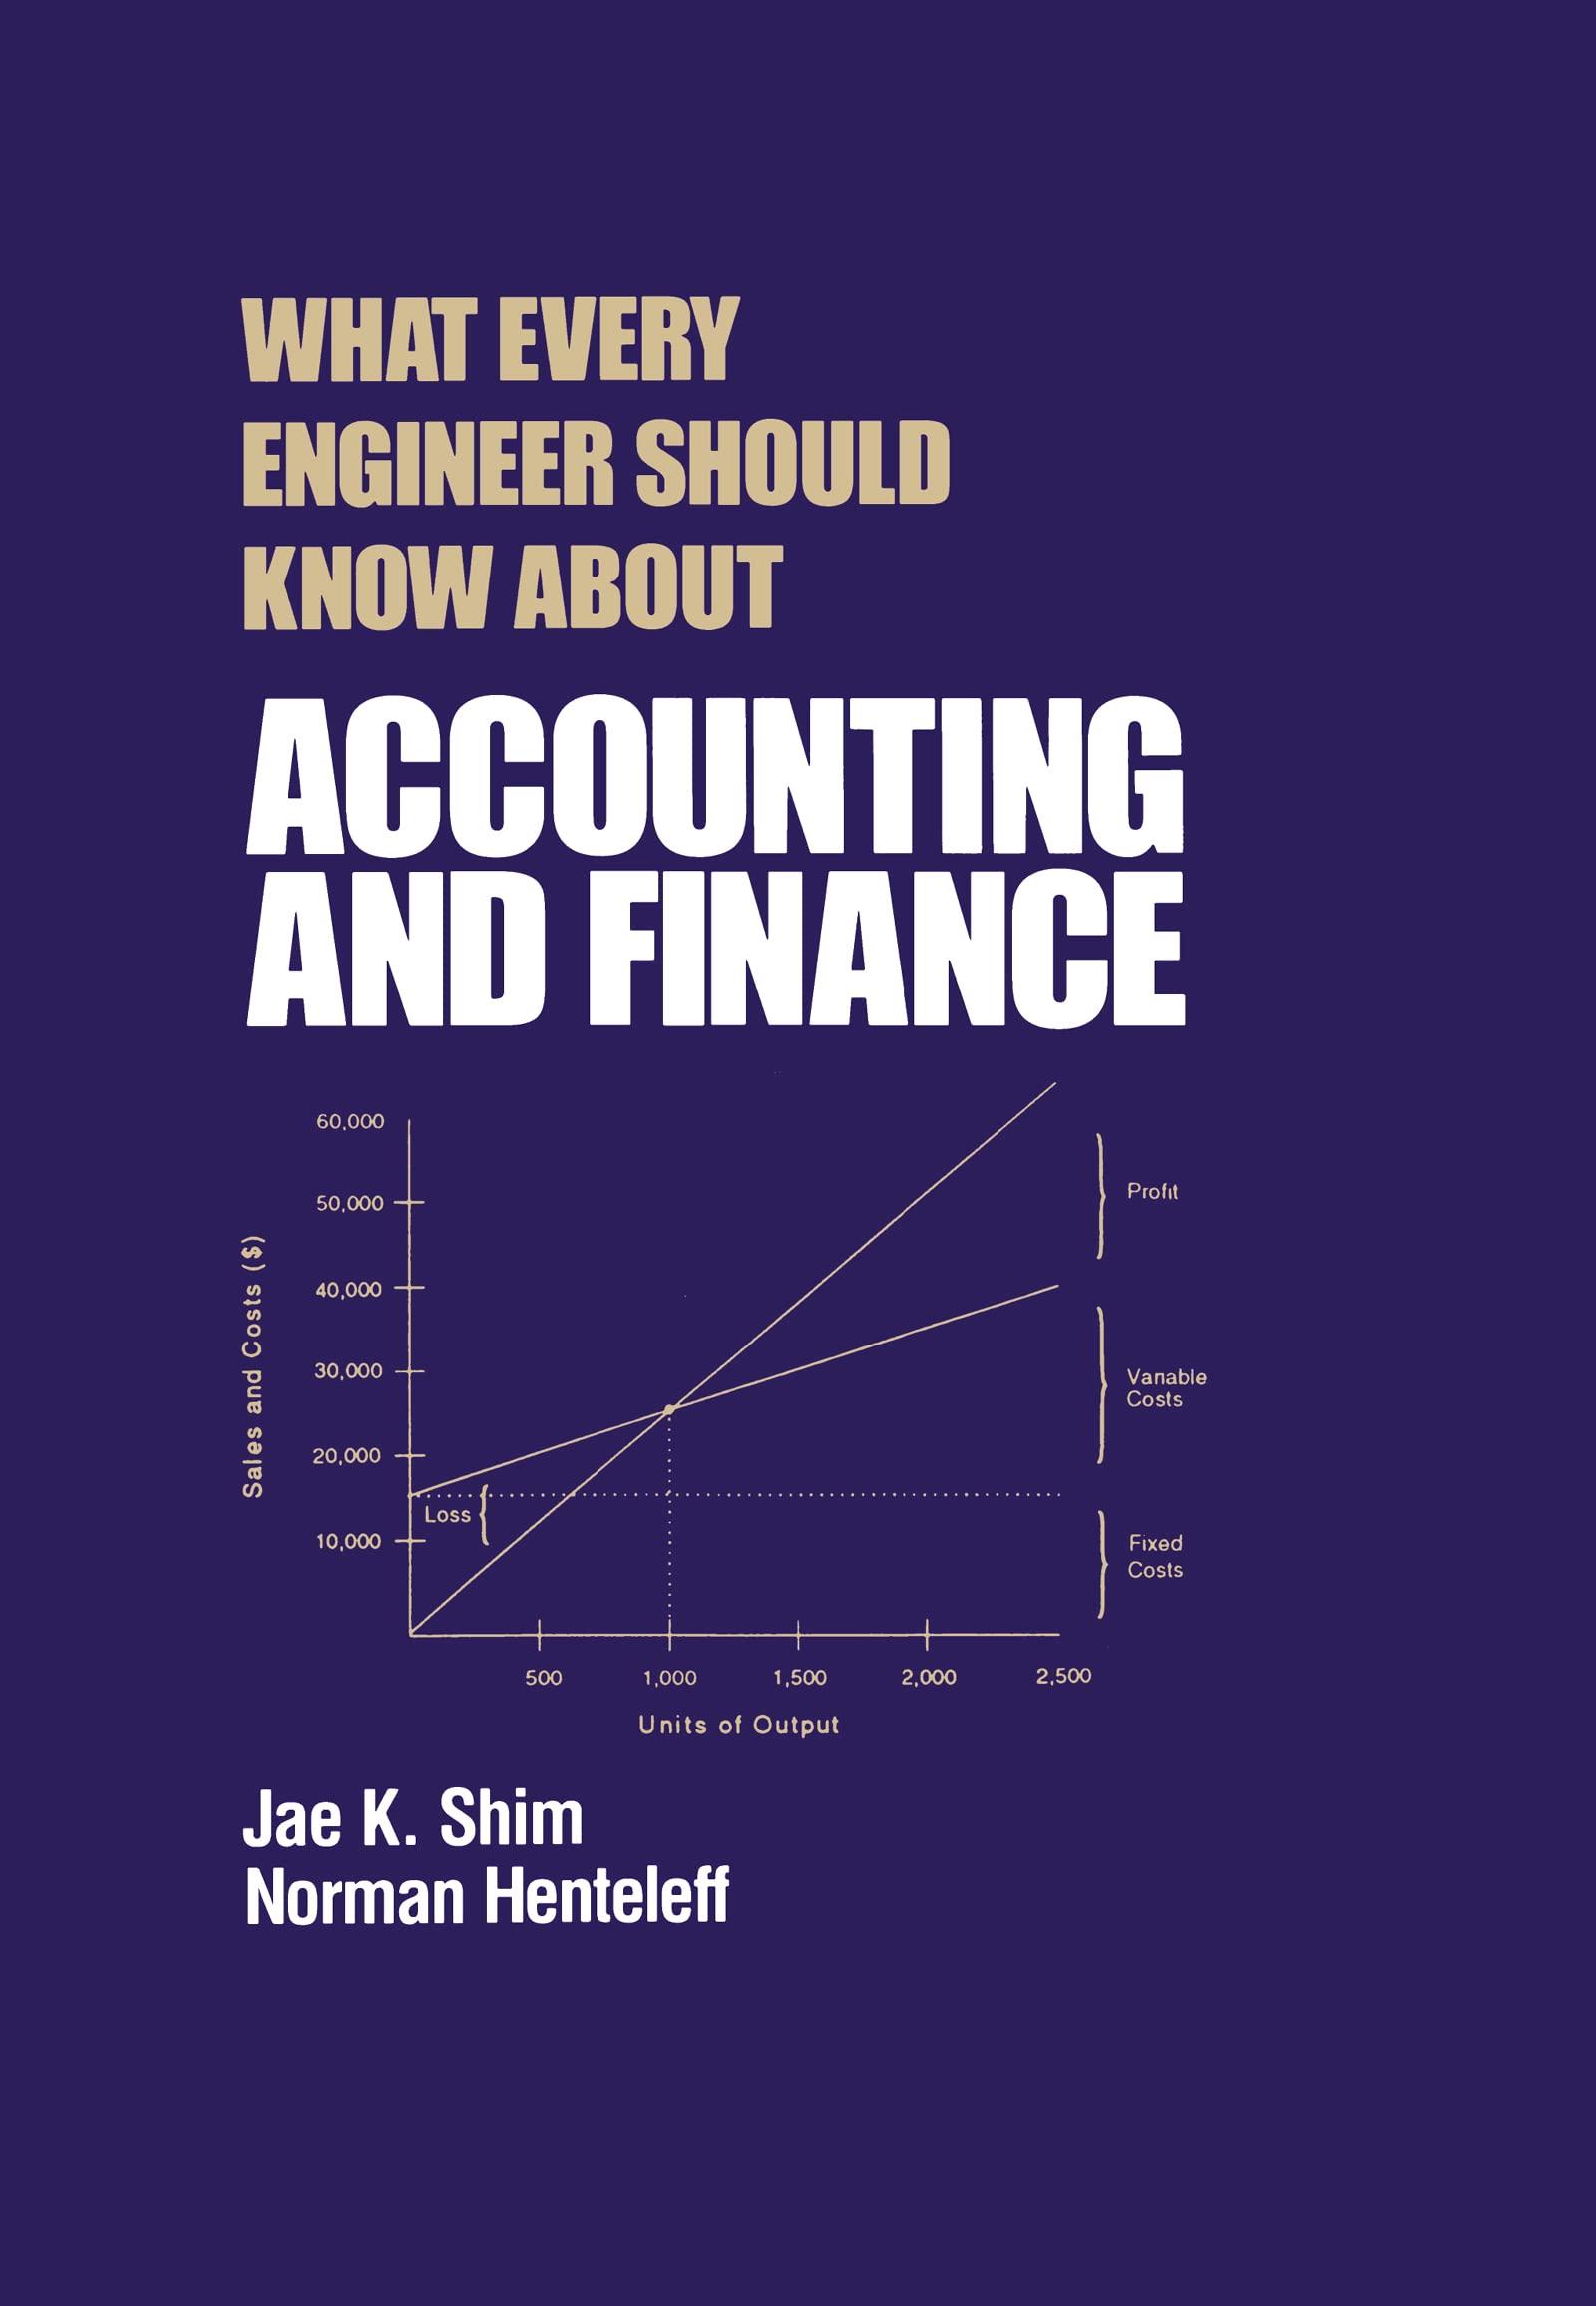 What Every Engineer Should Know About Accounting And Finance